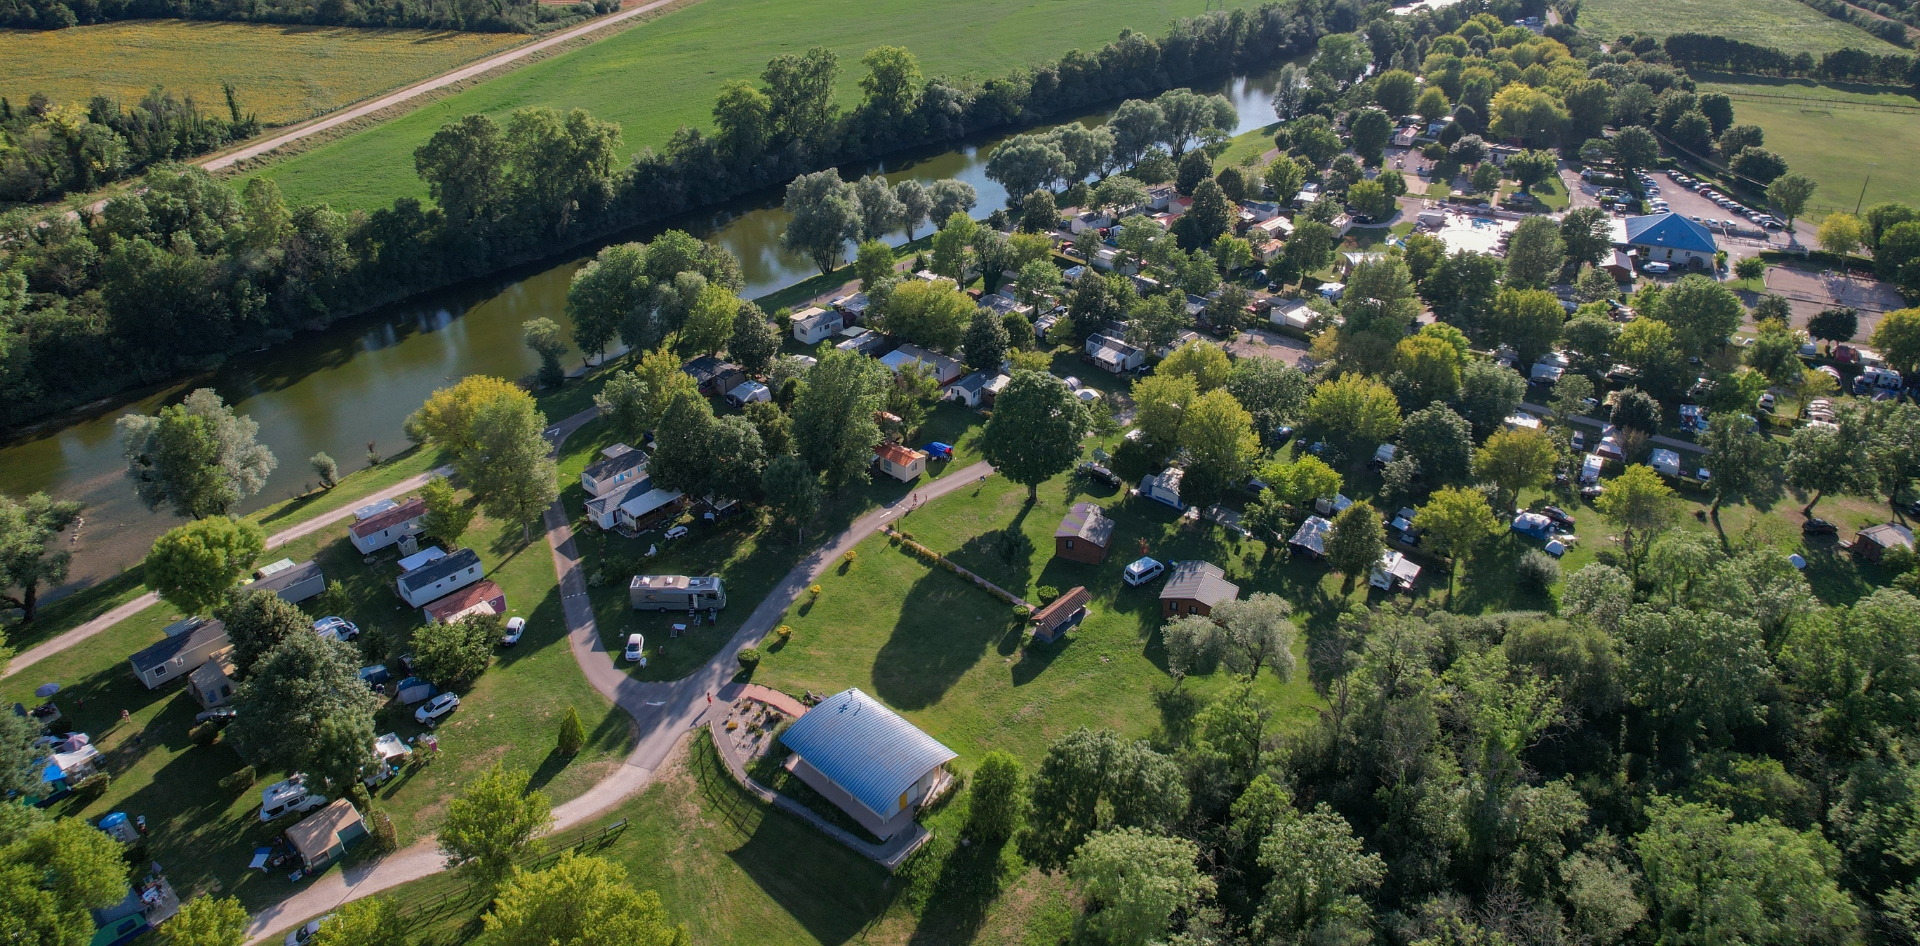 Aerial view of the chalets and mobile-homes to rent at Les Bords de Loue campsite in Jura